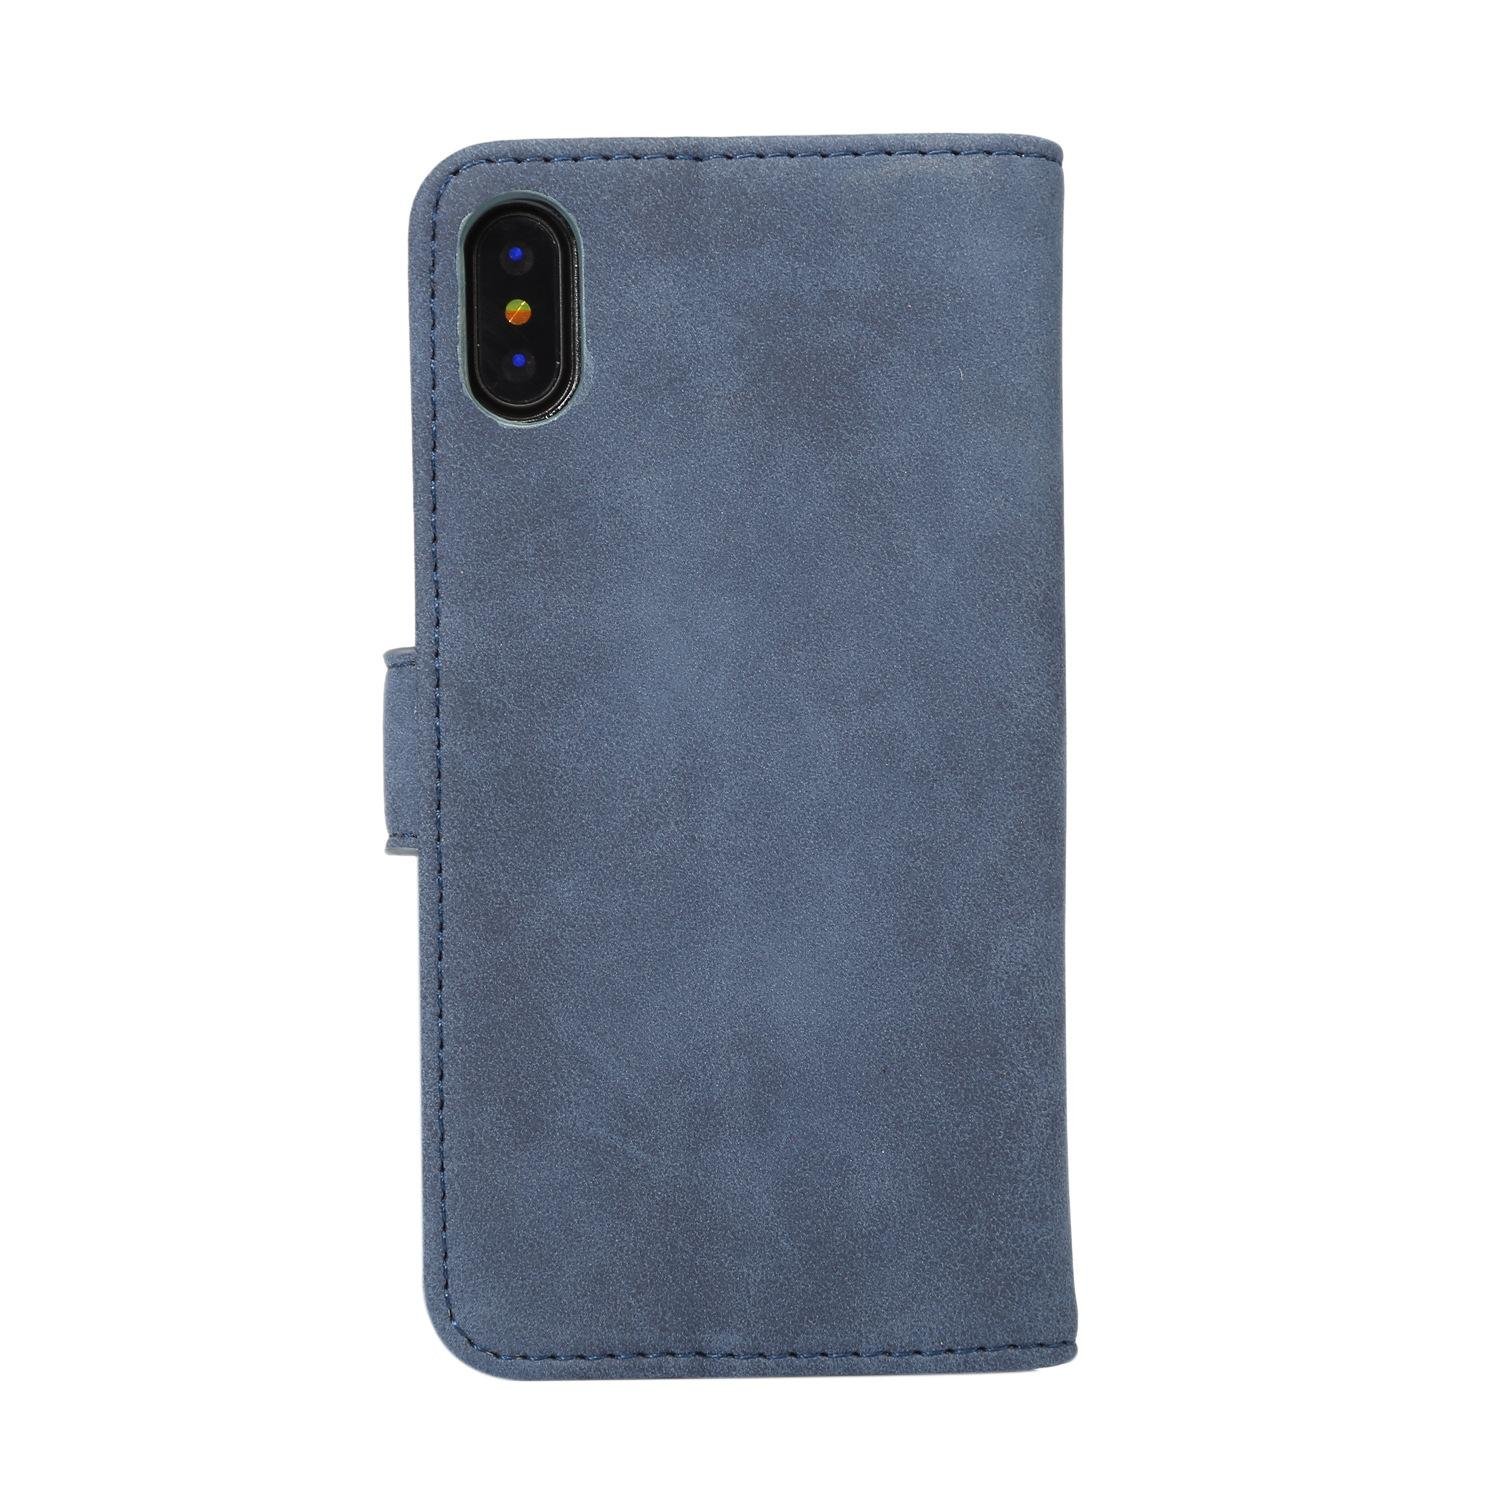 Really slick leather folio case with card slot for apple iPhone X